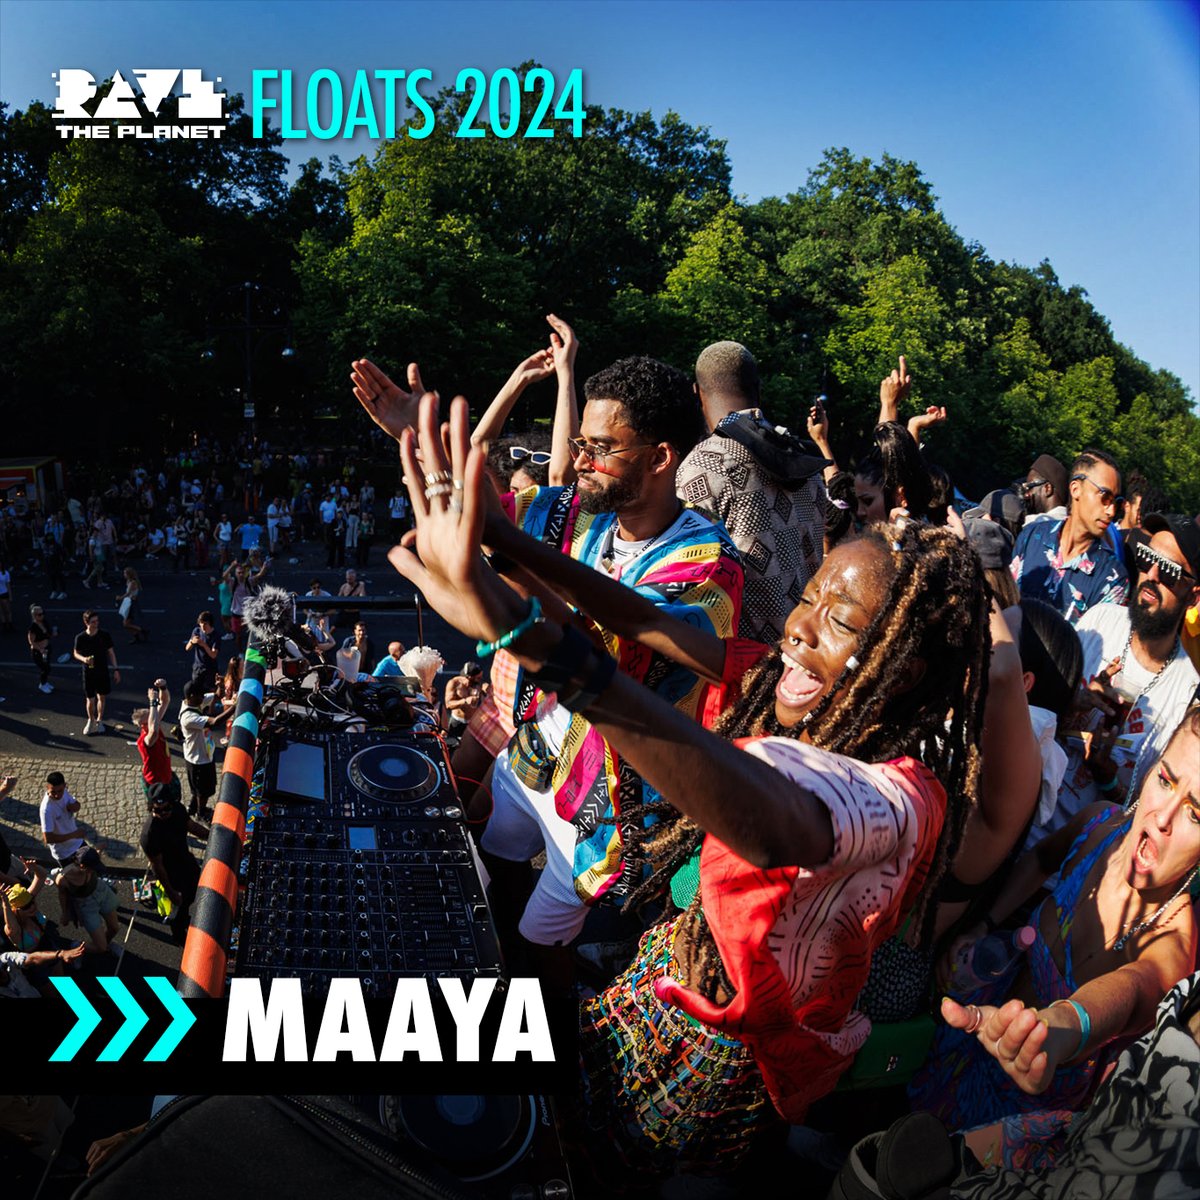 🔊 𝙁𝙇𝙊𝘼𝙏 𝘼𝙉𝙉𝙊𝙐𝙉𝘾𝙀𝙈𝙀𝙉𝙏

What's up, #Techno people!? 

Please welcome four more amazing float crews of the #RaveThePlanet Parade 2024!

❤🛻 #LoveIsStronger 🔊🎶

•••
#technoculture #demonstration #electronicmusic #technolovers #berlin #verknipt #raveculture